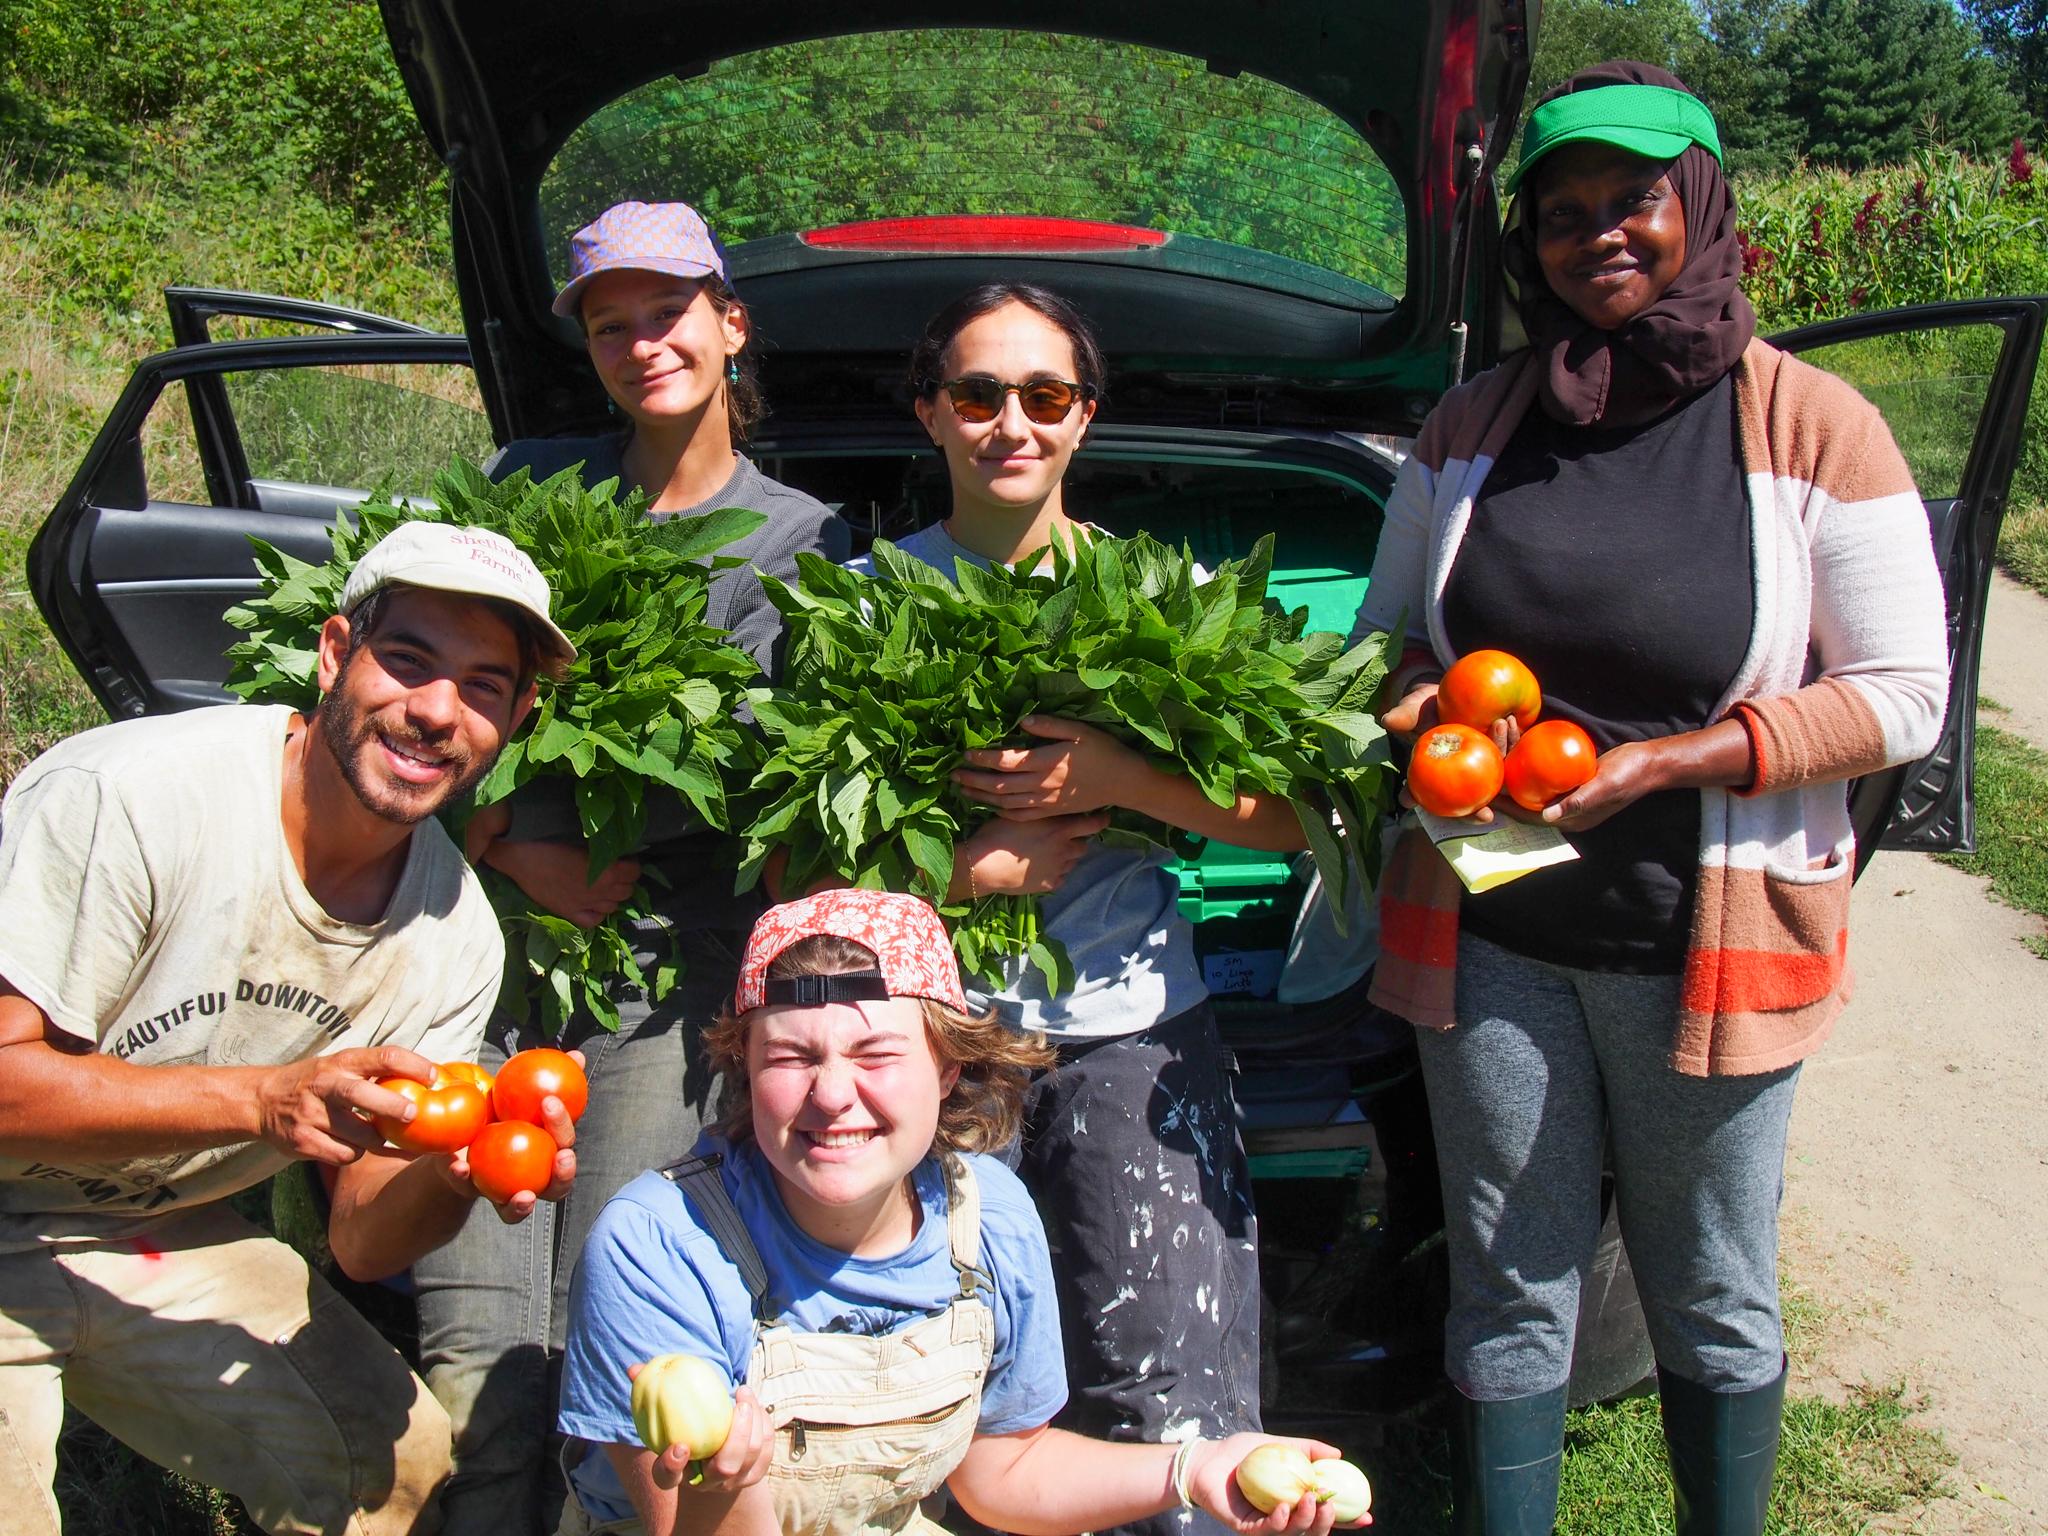 The People's Farmstand volunteers and organizers pose with vegetables they harvested for their free community farmstand events